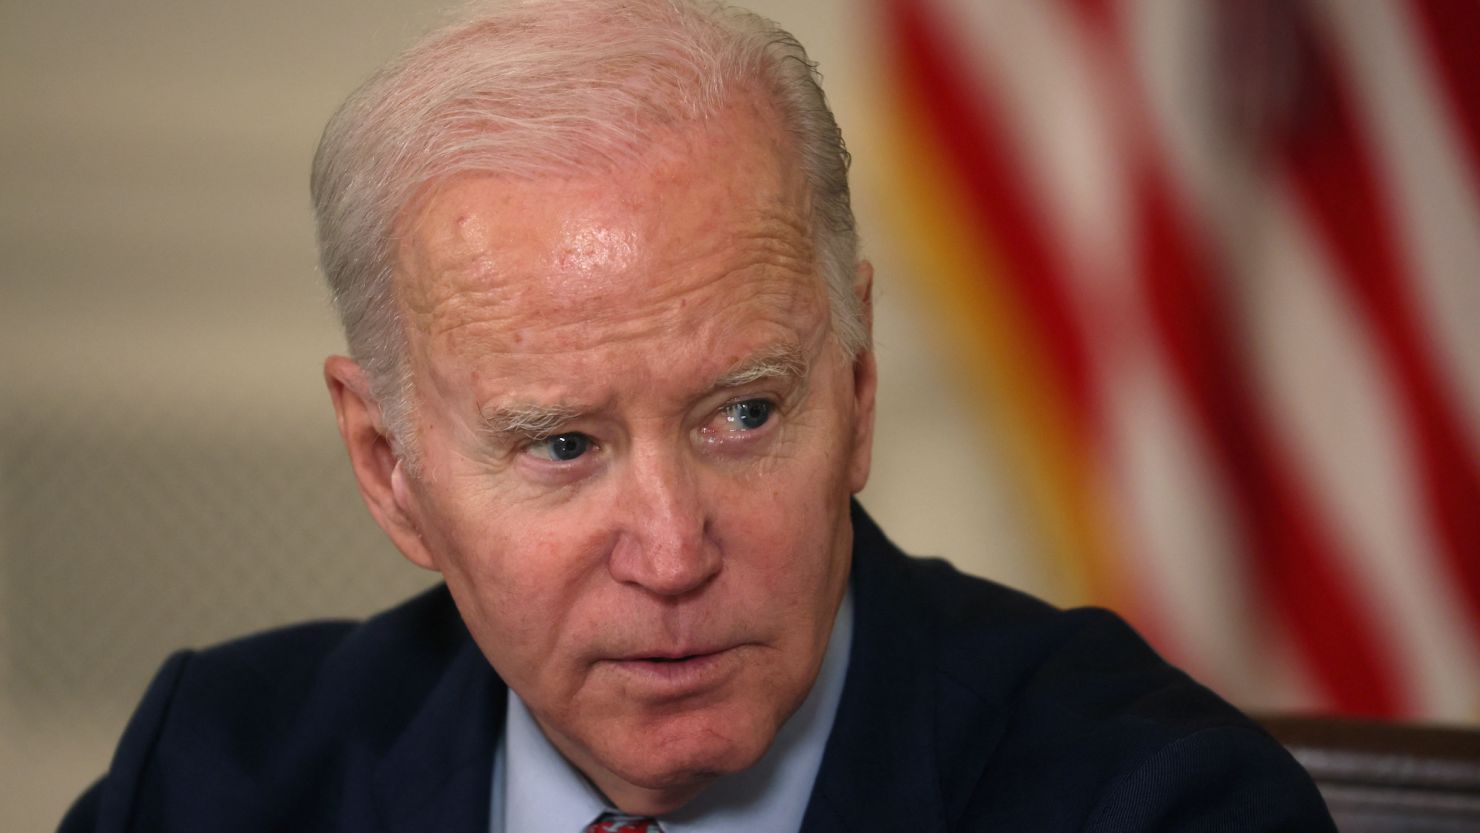 CNN Poll of Americans say Biden deserves to be reelected in